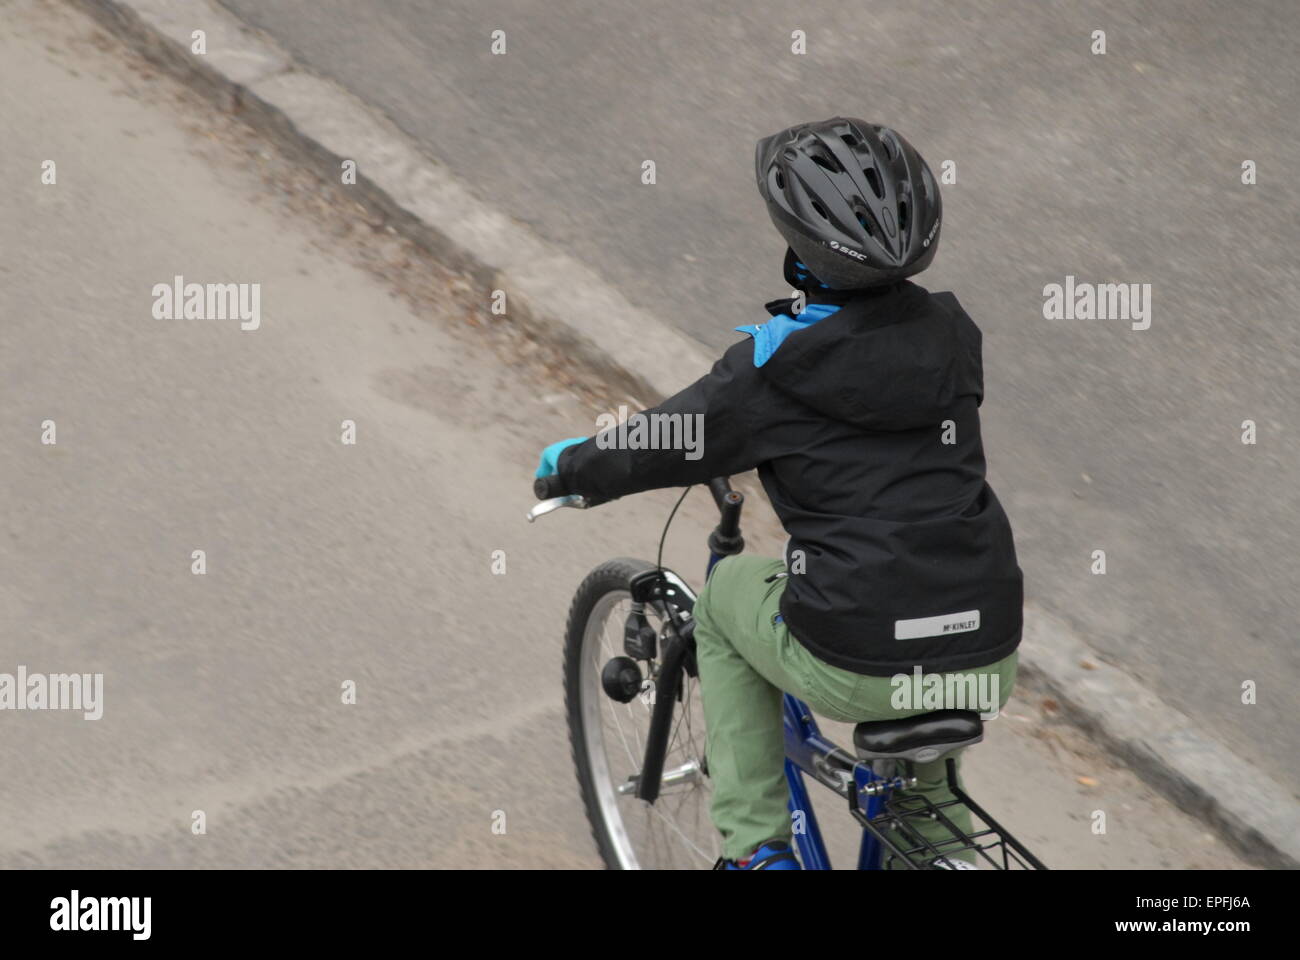 Child riding a bike in a city street. Stock Photo